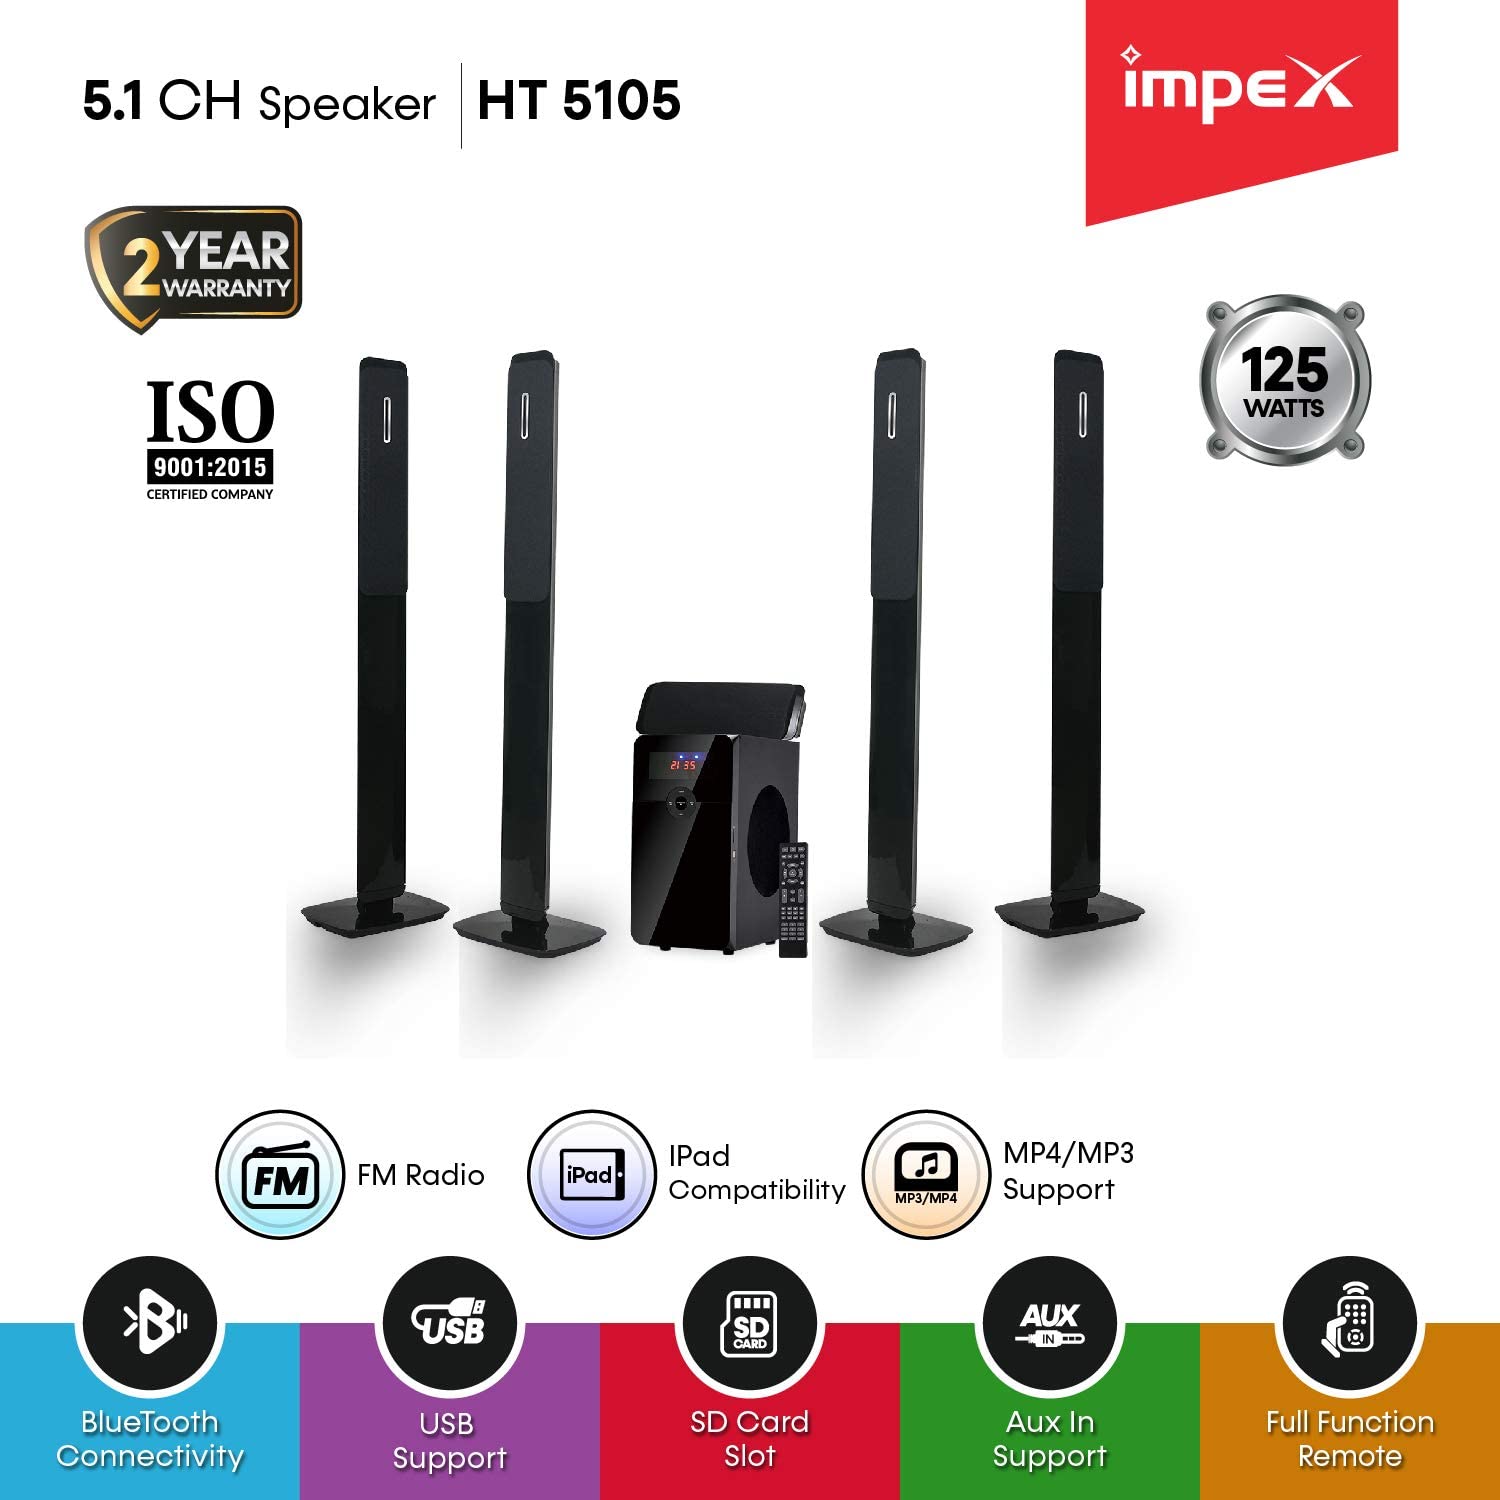 Impex HT 5105 40W Subwoofer Wooden ABS Covered Black 5.1 Channel Multimedia Home theatre Speaker System with Remote Control BT/FM Radio/USB/MP3/SD/AUX